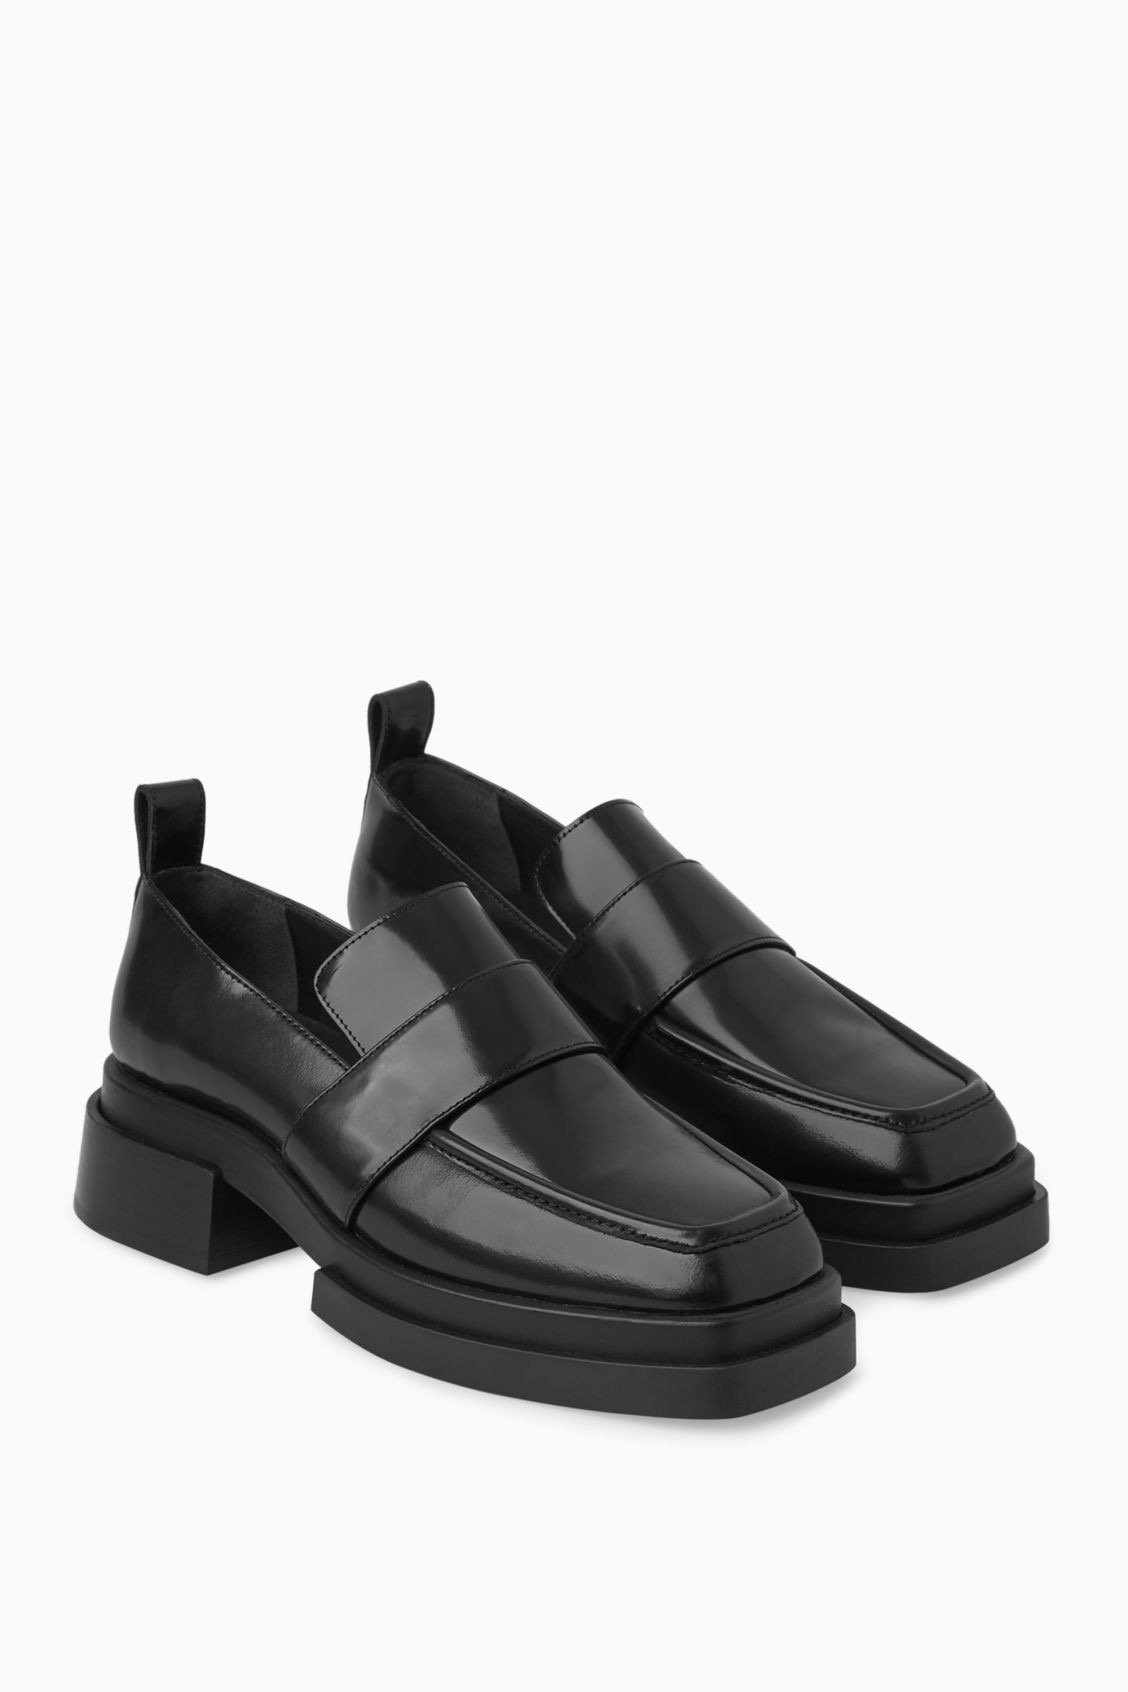 COS chunky black loafers